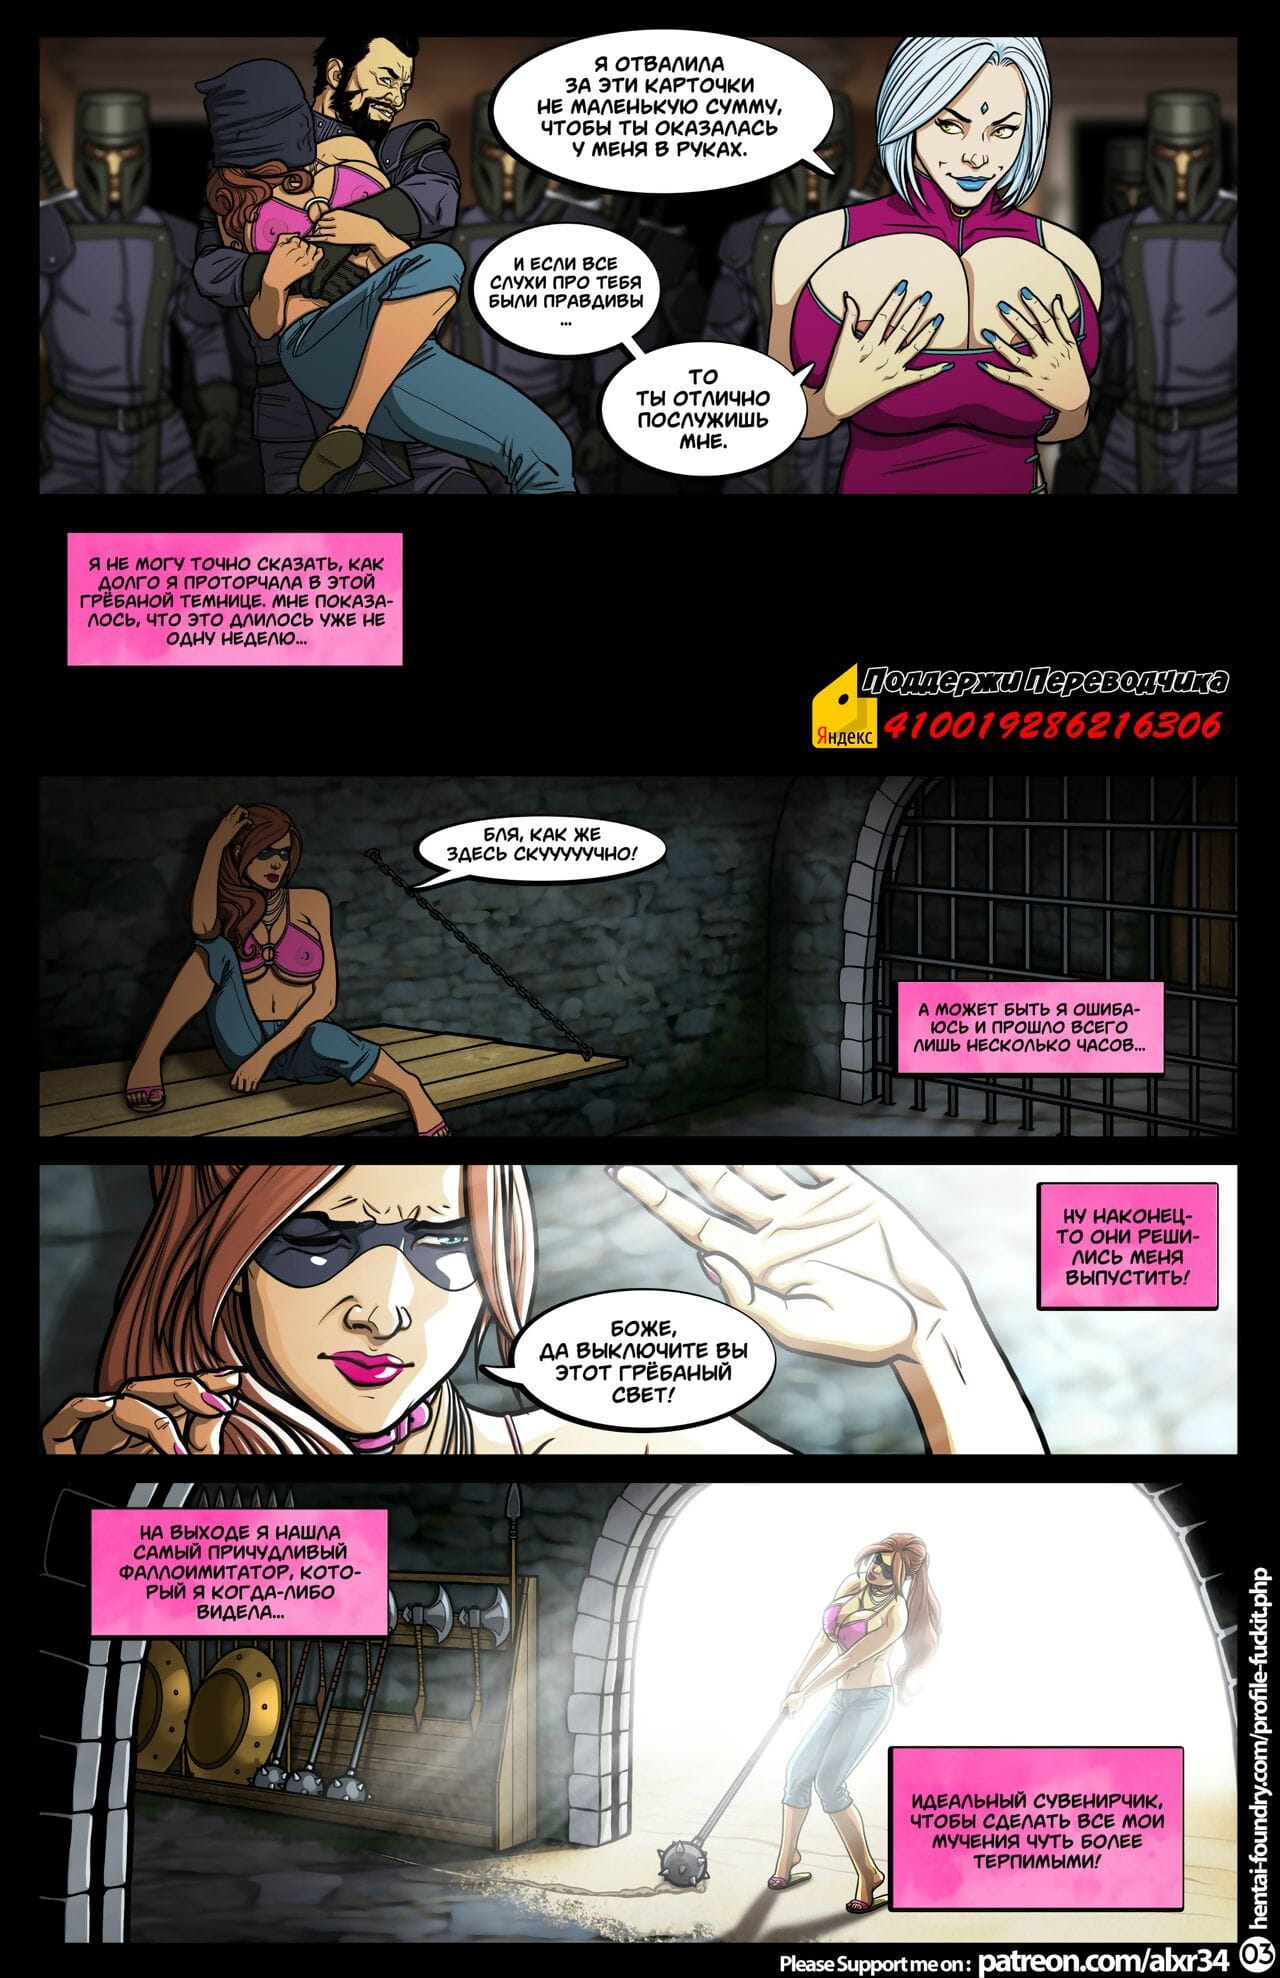 Legend of Queen Opala: Tales of Gabrielle - The Pit - ??????? ? ?????? ?????: ???????? ? ???????? - ??? page 1